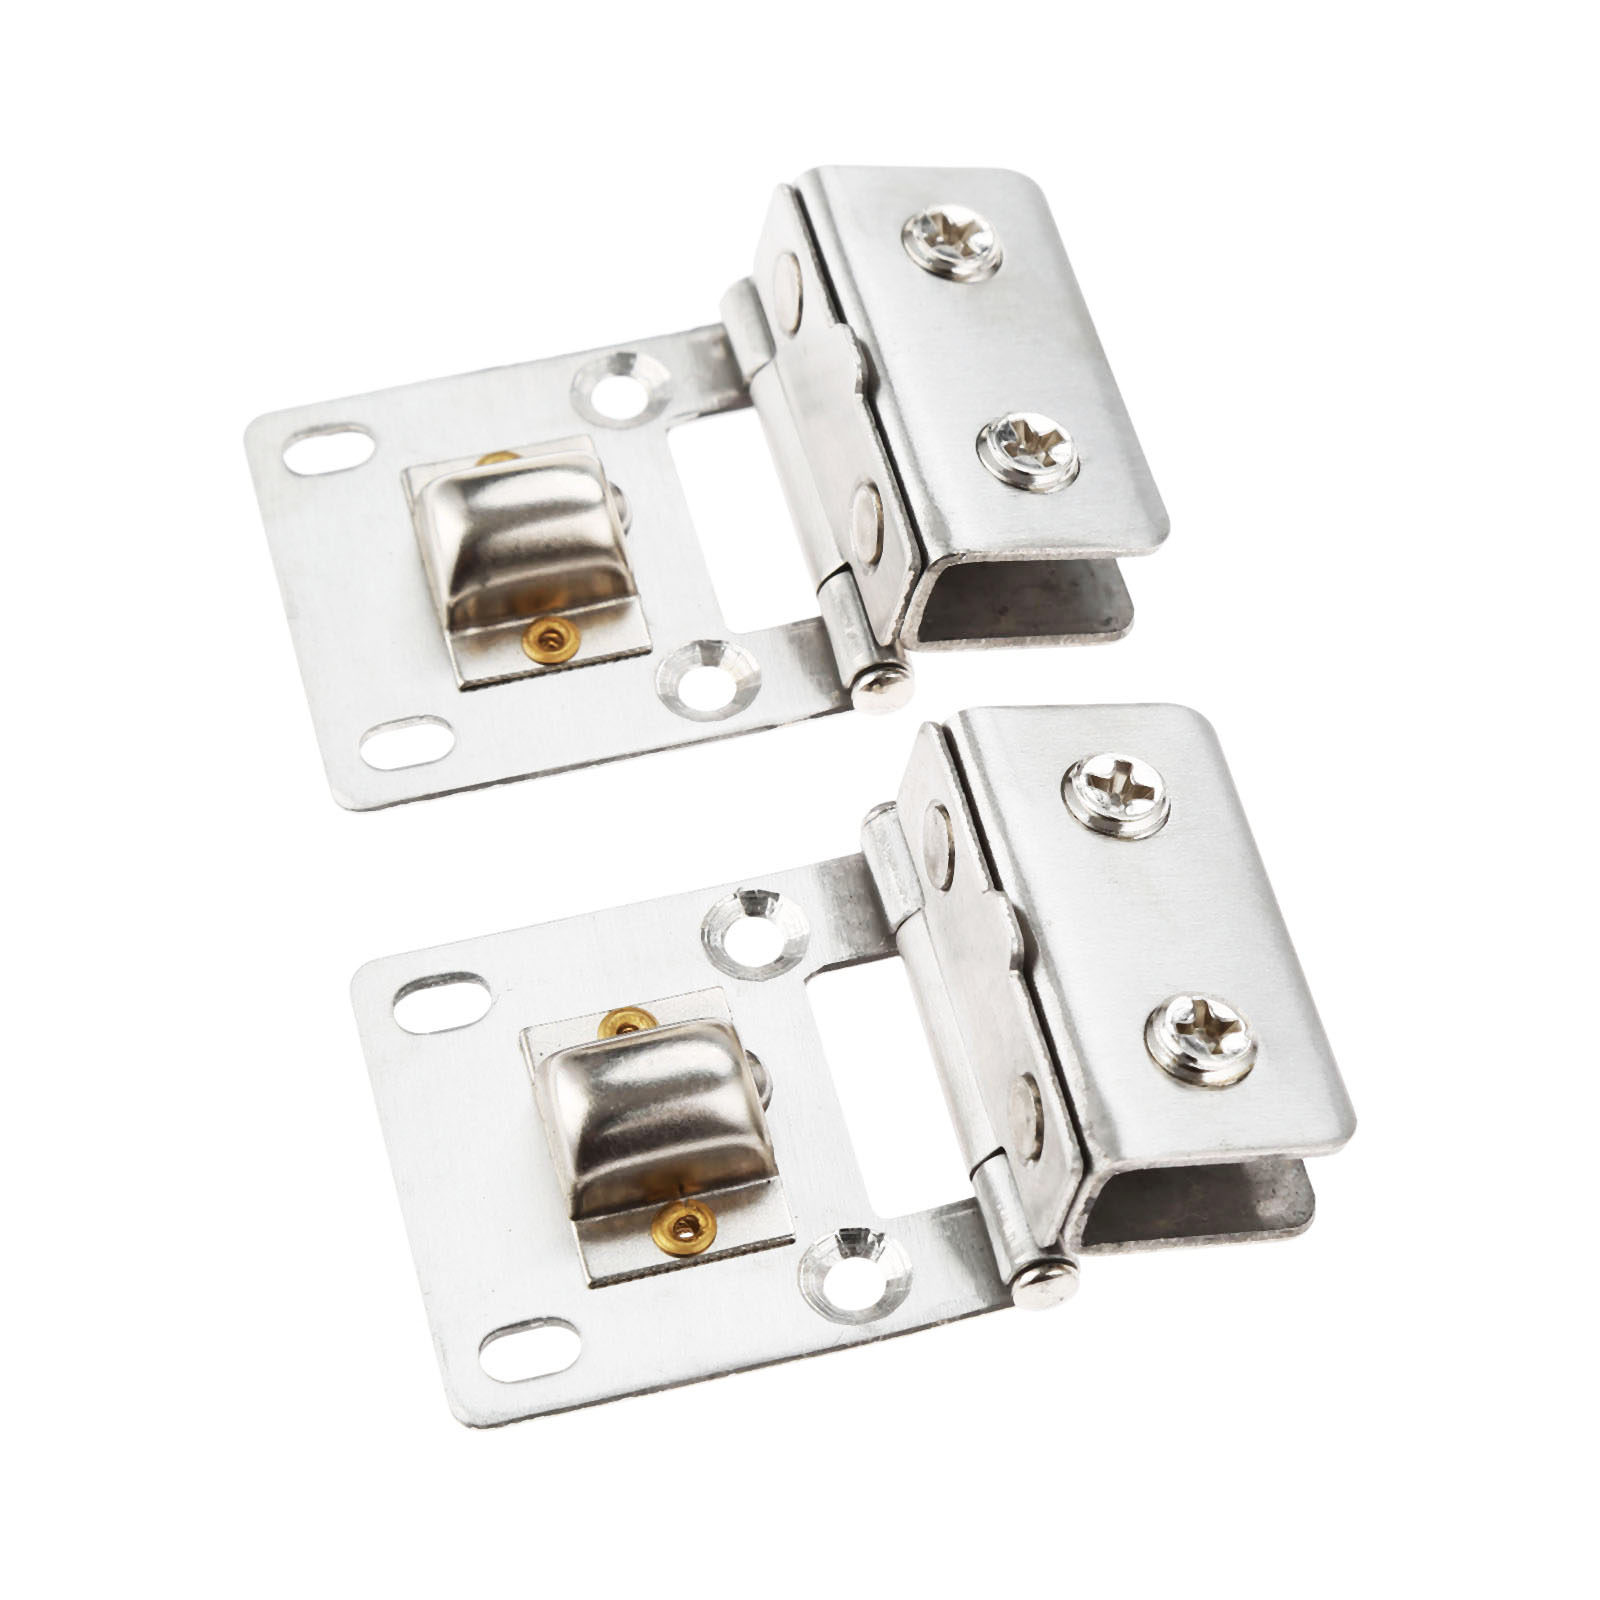 DRELD 2Pcs Stainless Steel Wall Mount Cabinet Glass Door Hinges Clamp for 5-8mm Thick Glass Furniture Hinge Silver Tone